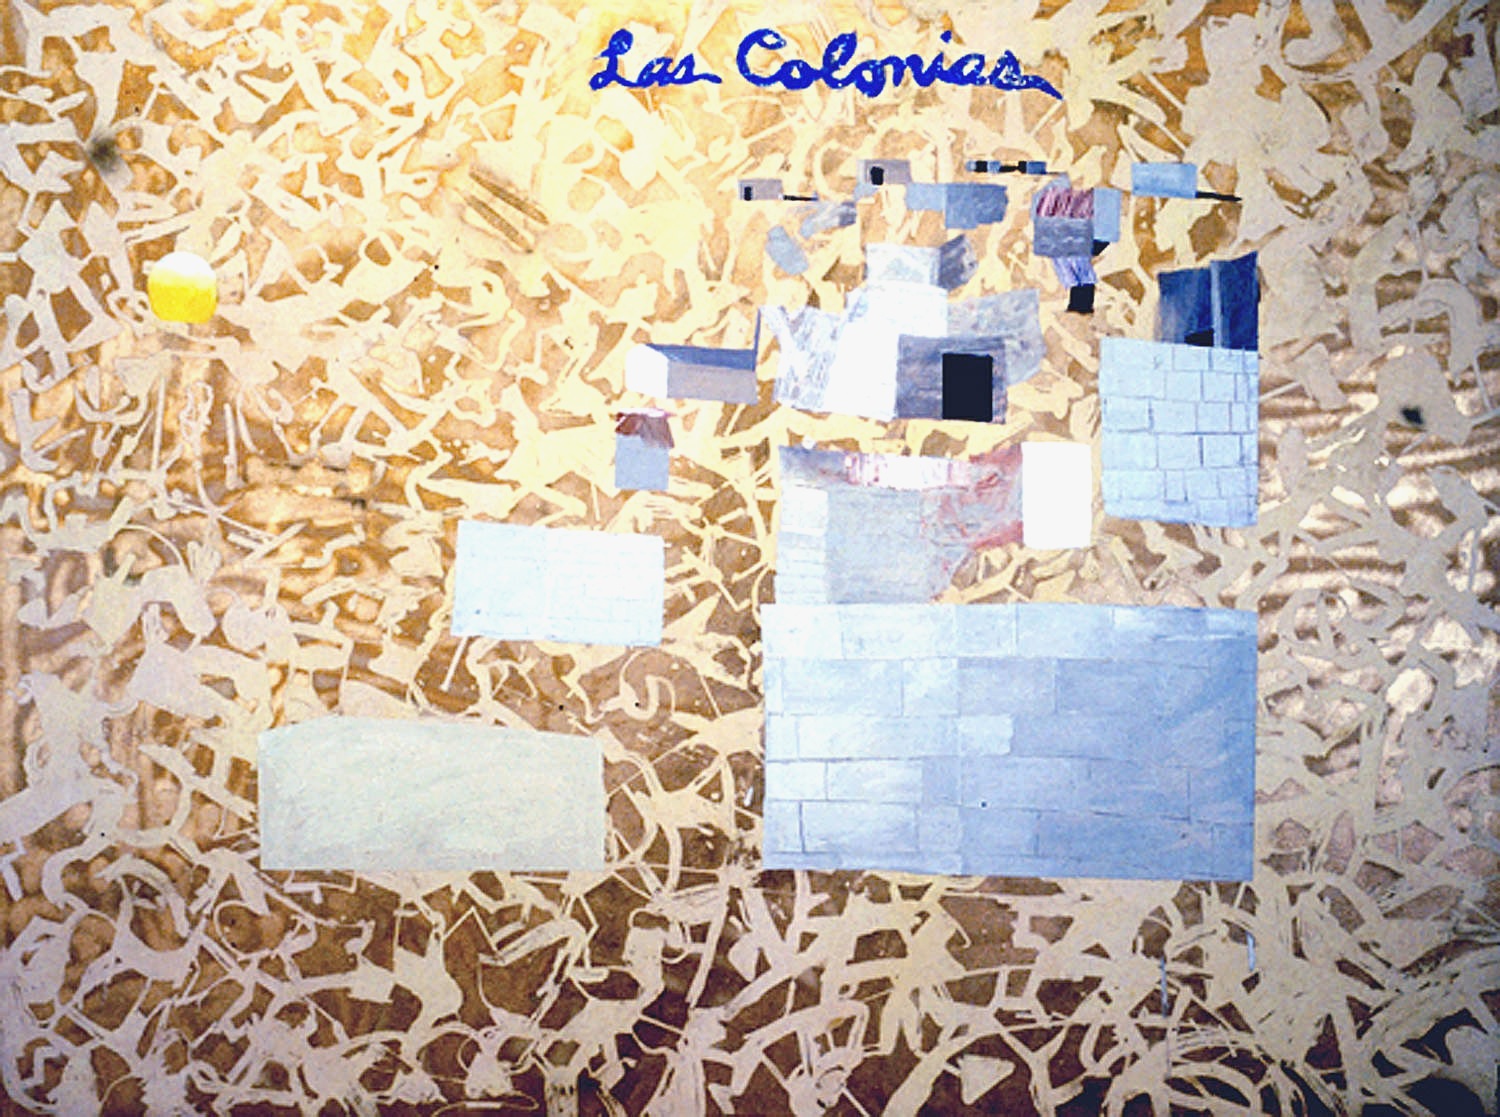   Las Colonias , 2001, glitter, oil paint and spray enamel on canvas, 72 x 96 inches 